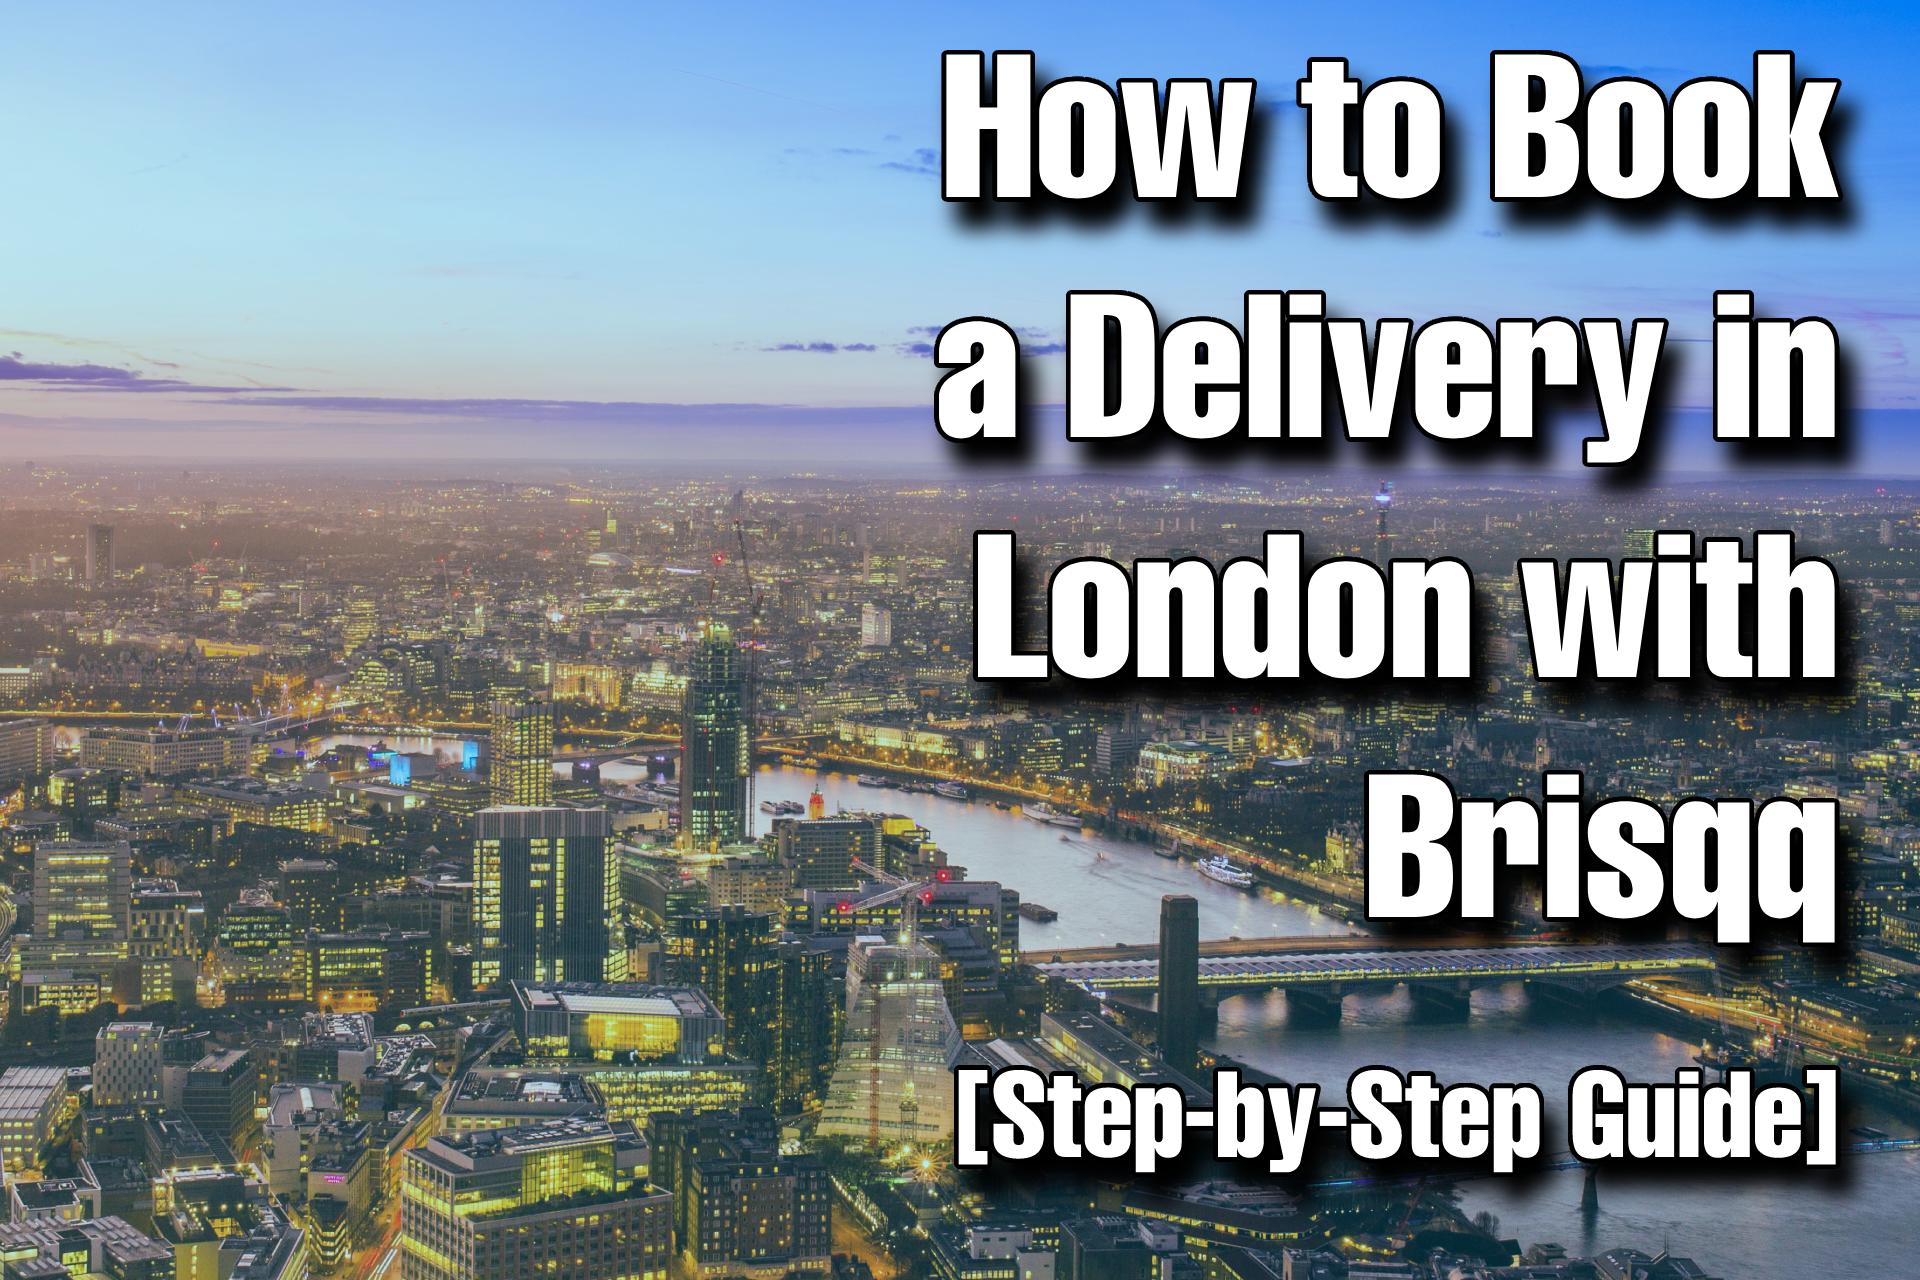 How to Book a Delivery in London with Brisqq [Step-by-Step Guide]